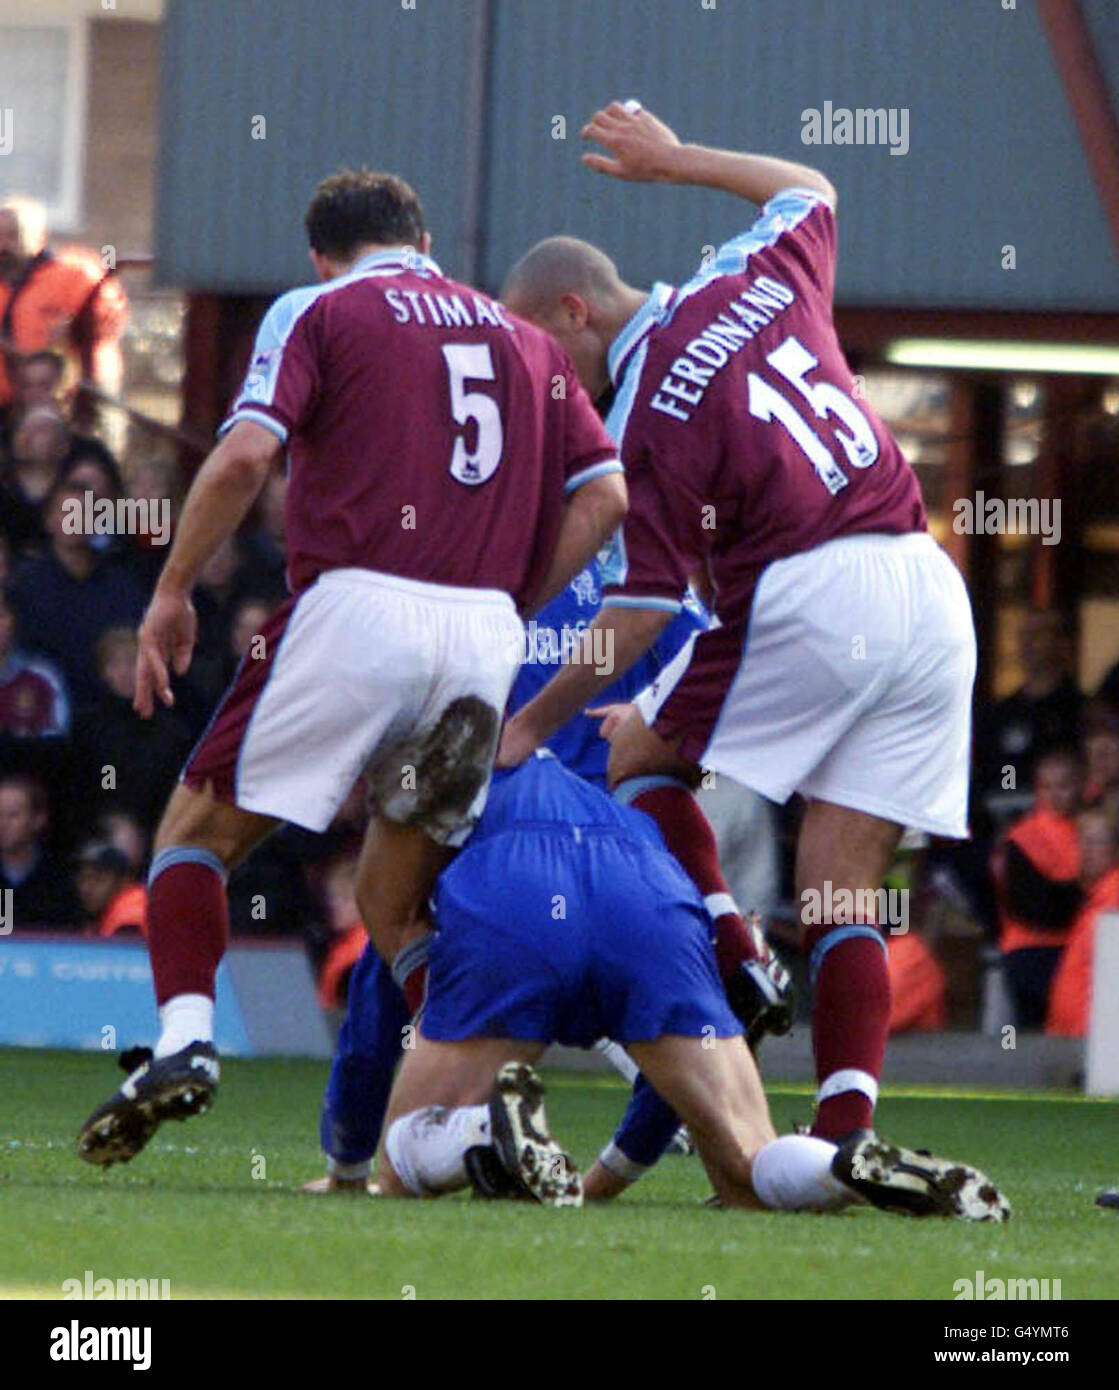 Tore Andre Flo, centre, Igor Stimac, left, and Rio Ferdinand, right, during the West Ham v Chelsea Premiership football match at Upton Park. * Flo and Stimac were booked after this scuffle during the first half. Stock Photo